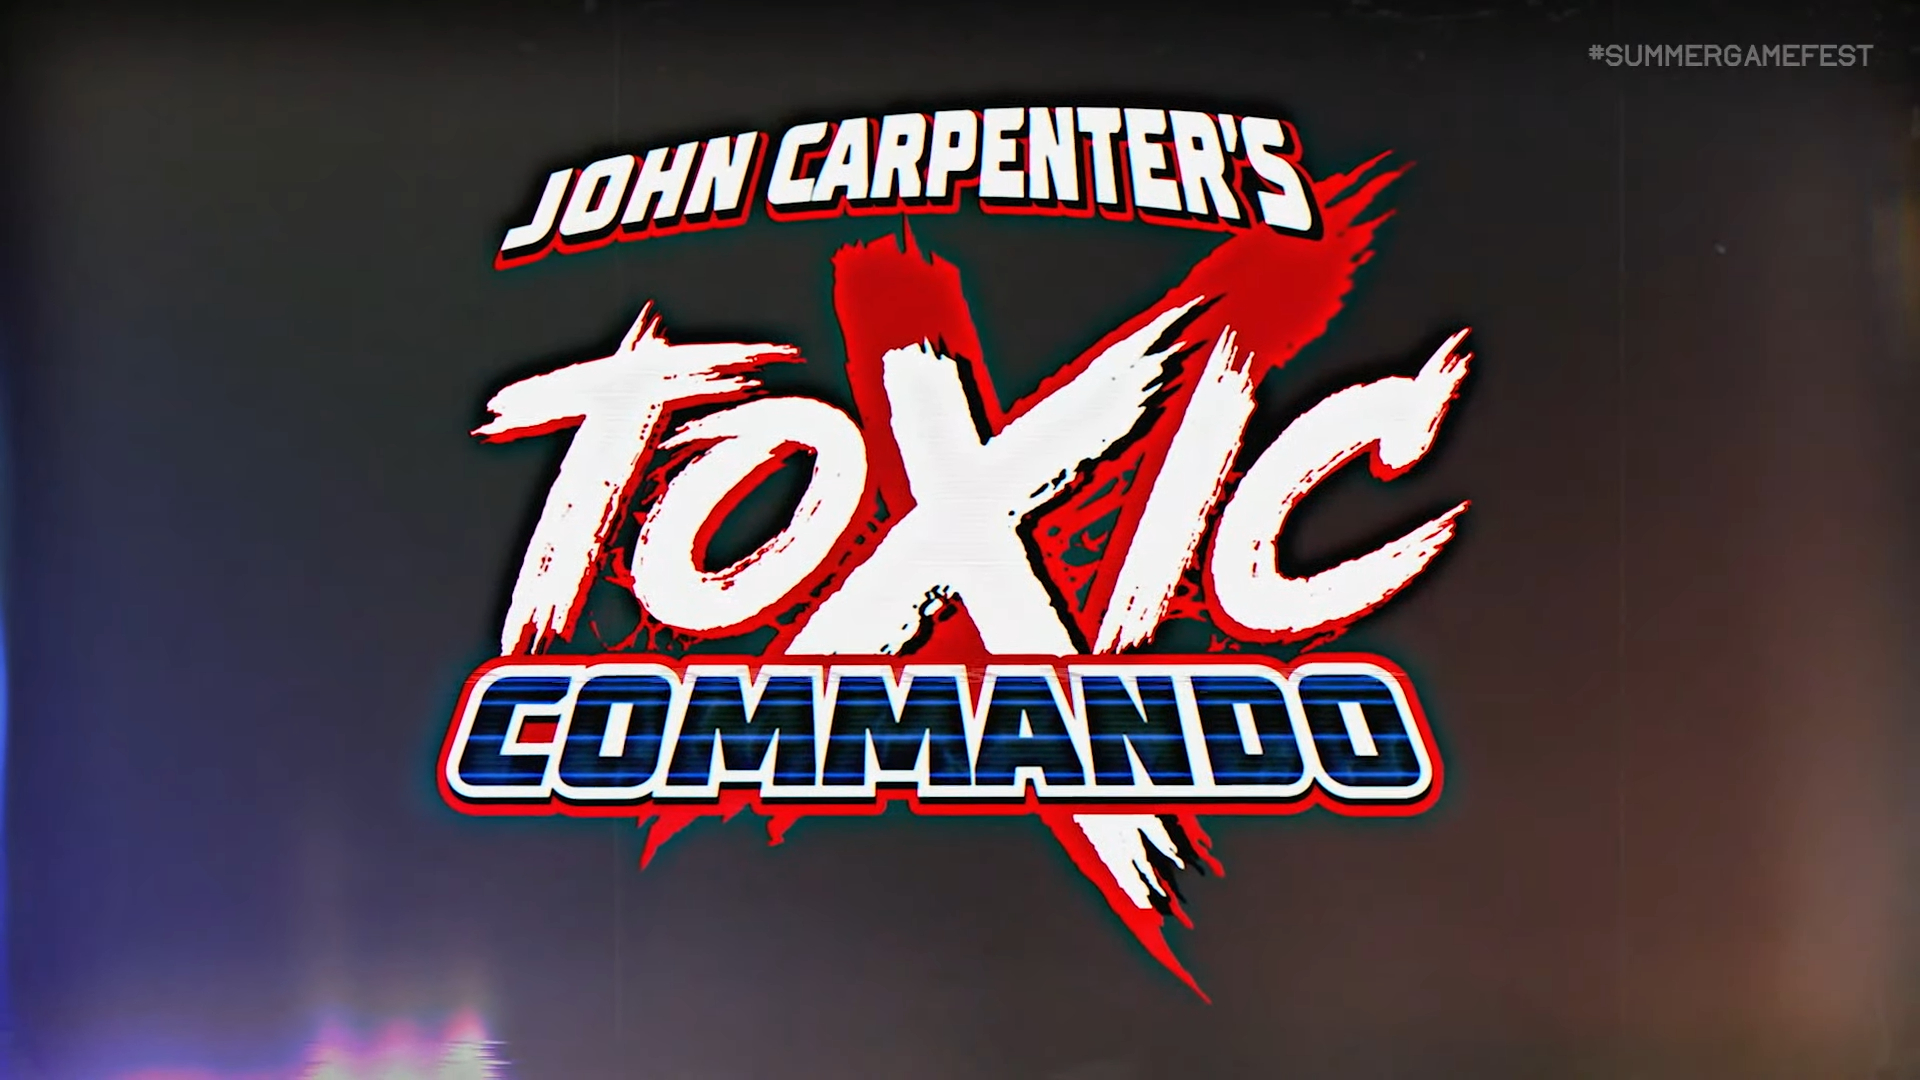 To my fellow Runners, has anyone seen the John Carpenter's Toxic Commando  reveal trailer? Focus Entertainment and Saber are working on a zombie coop  shooter but with.trucks and getting stuck. Anyone else